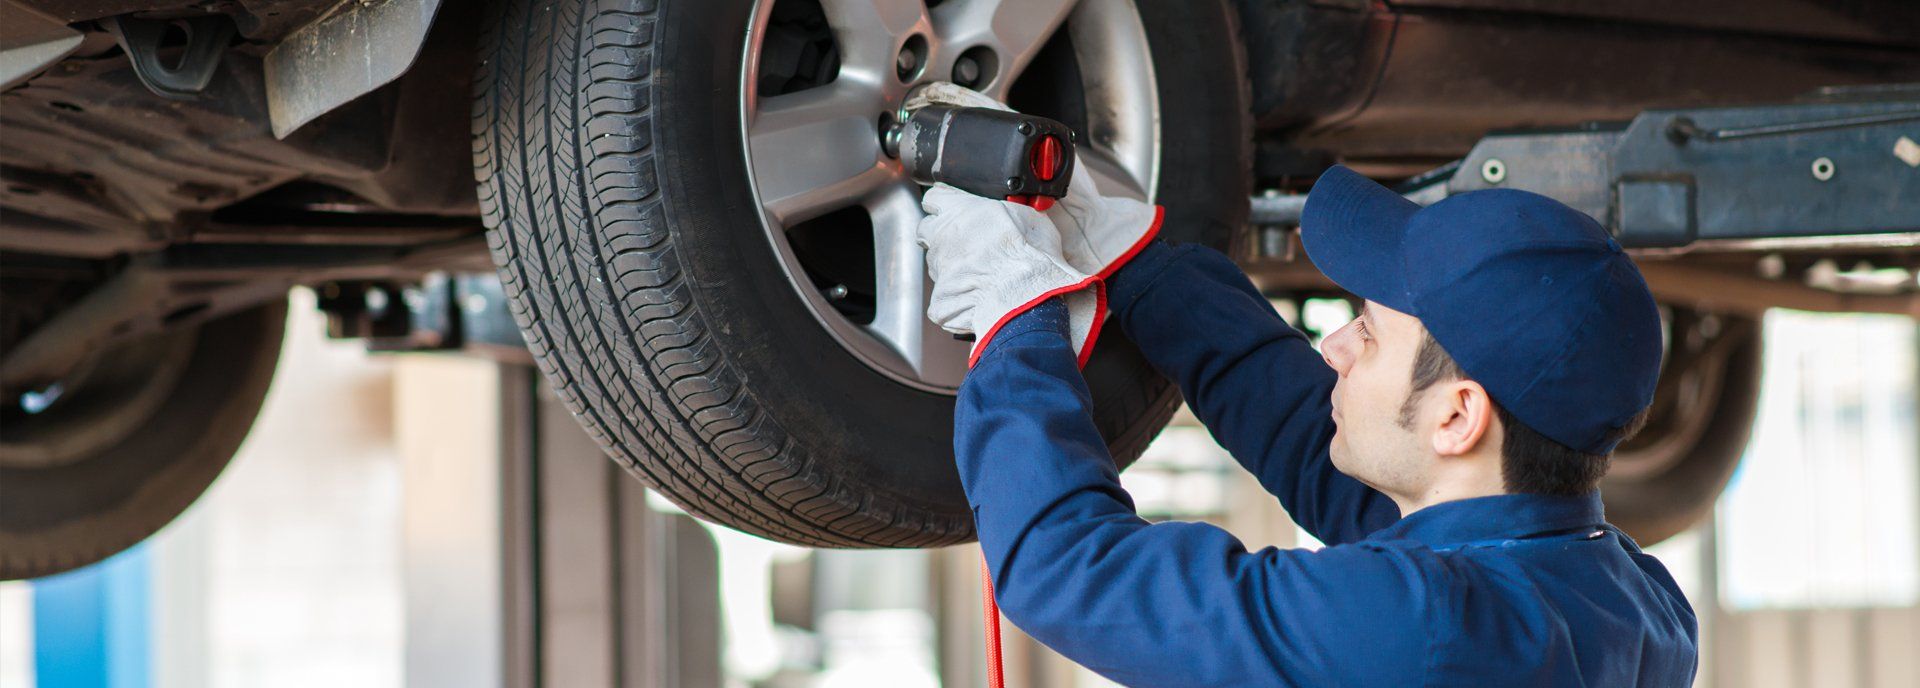 Tyre fitting services by experts in Glasgow